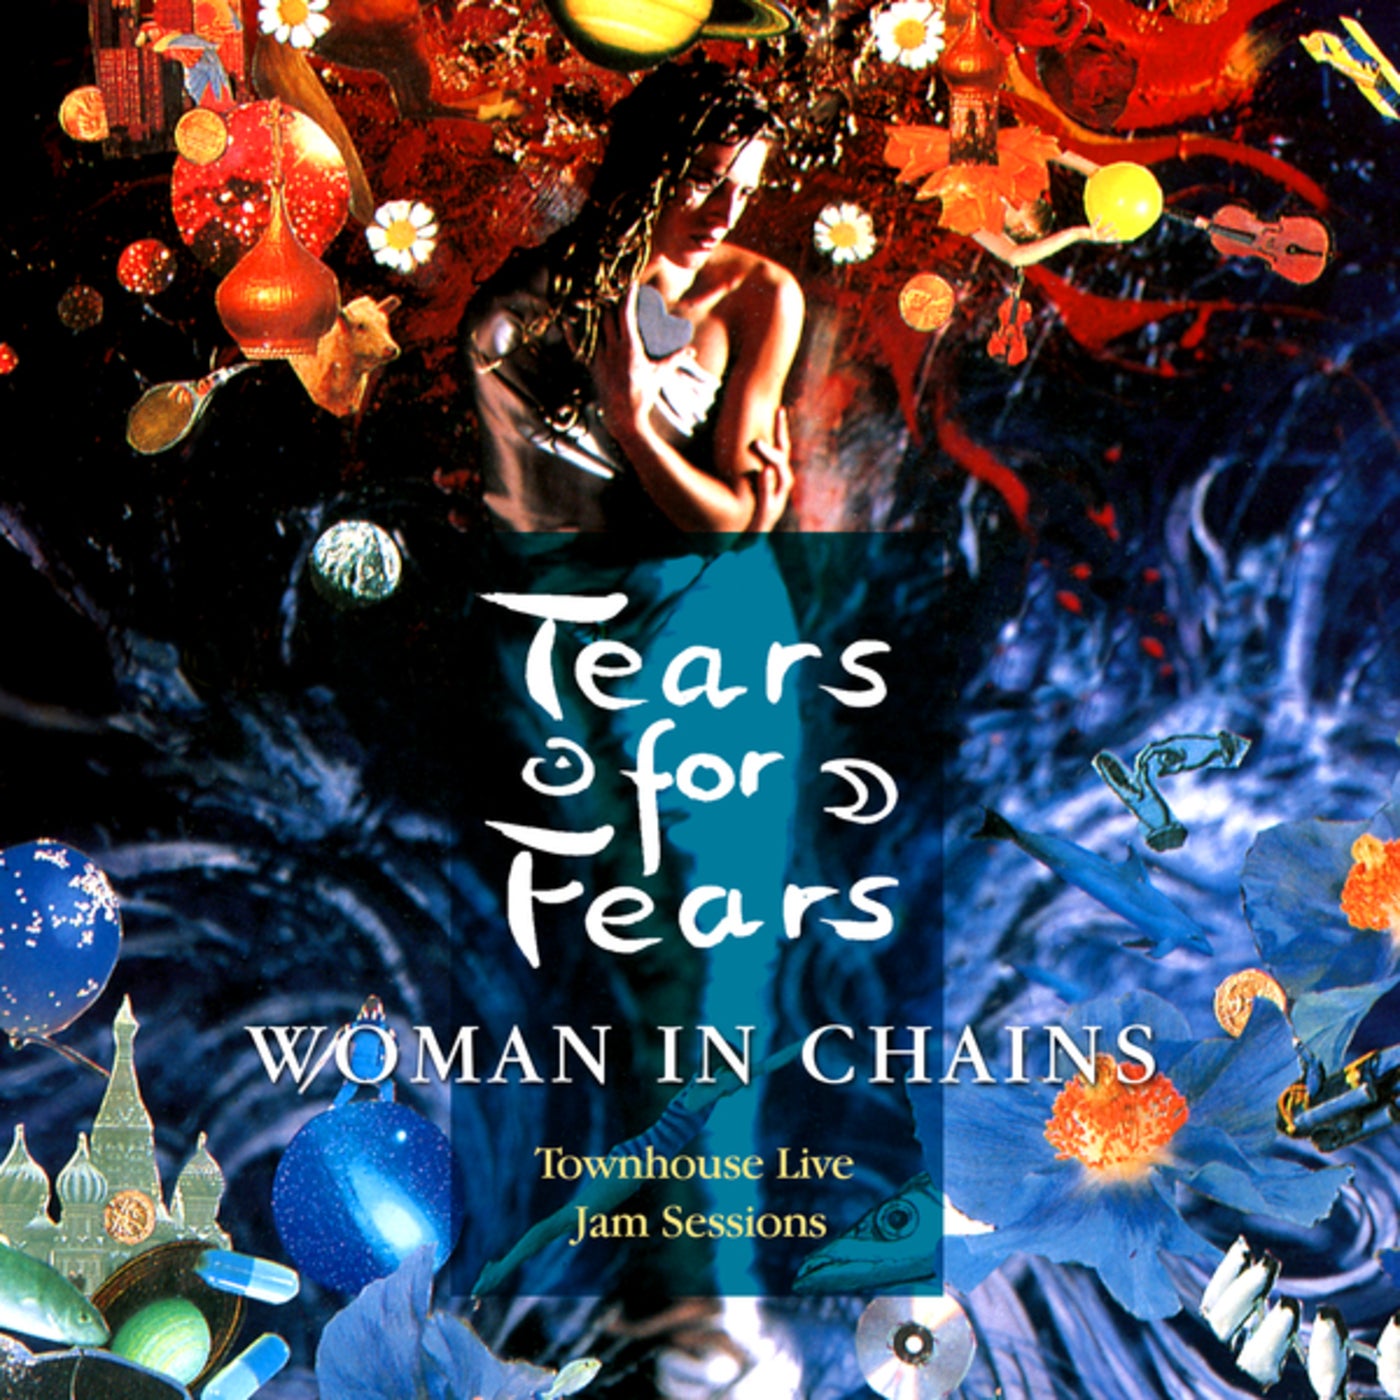 Woman In Chains - song and lyrics by Tears For Fears, Oleta Adams